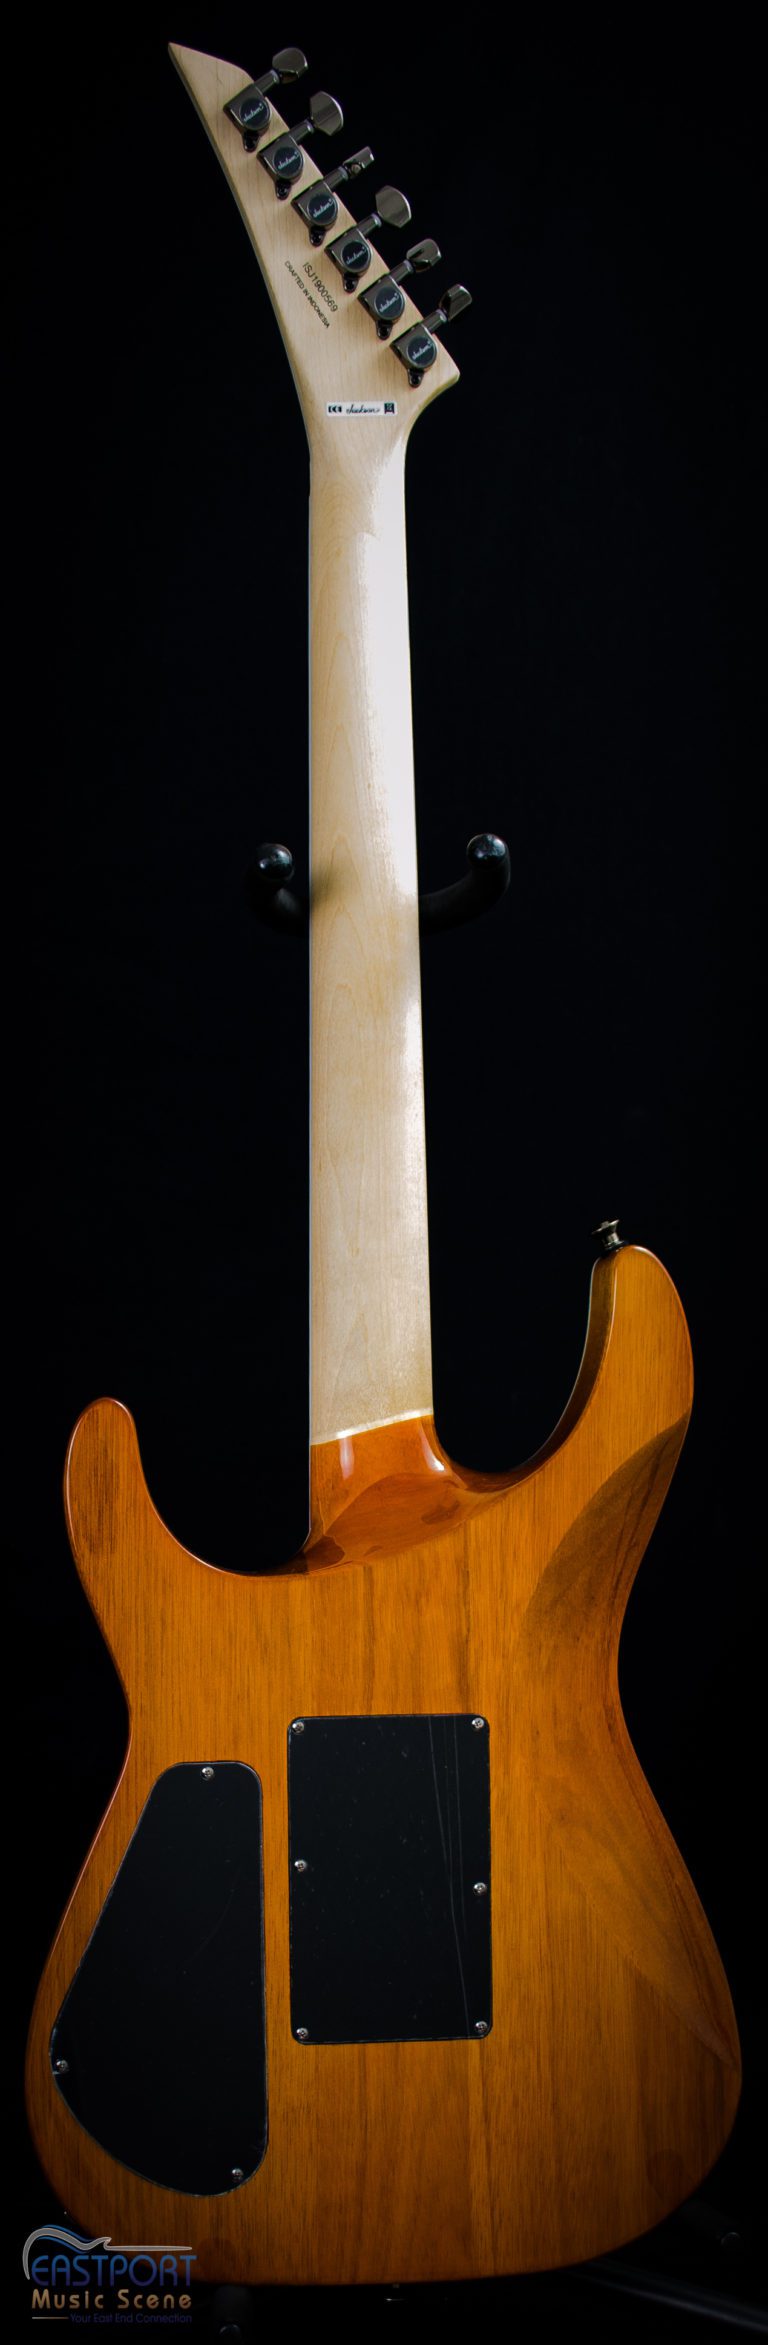 A guitar with the neck turned to show its front end.